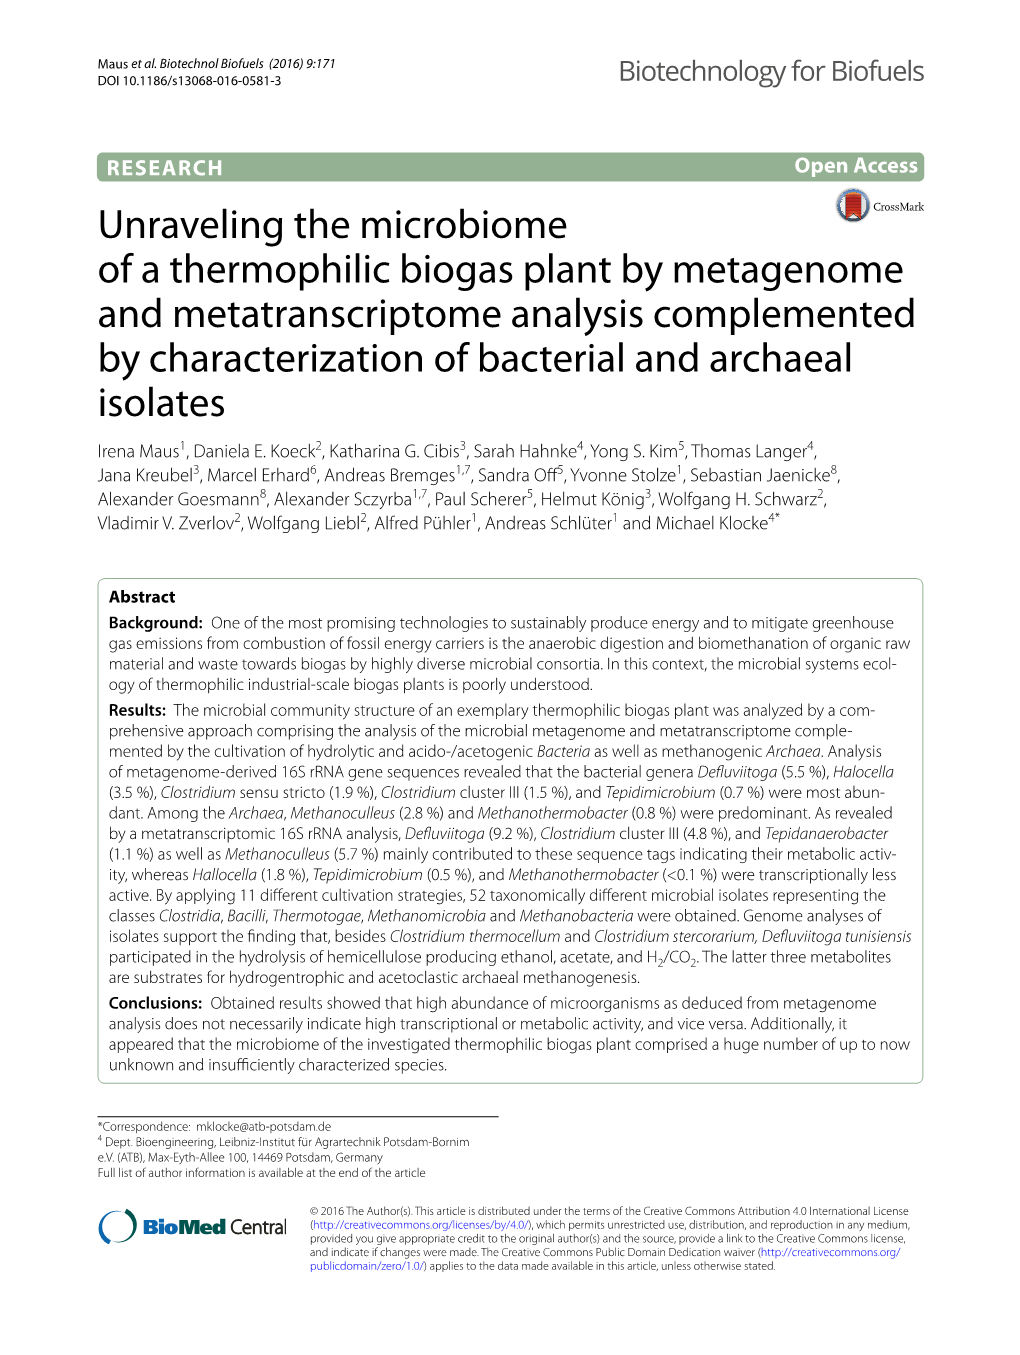 Unraveling the Microbiome of a Thermophilic Biogas Plant By